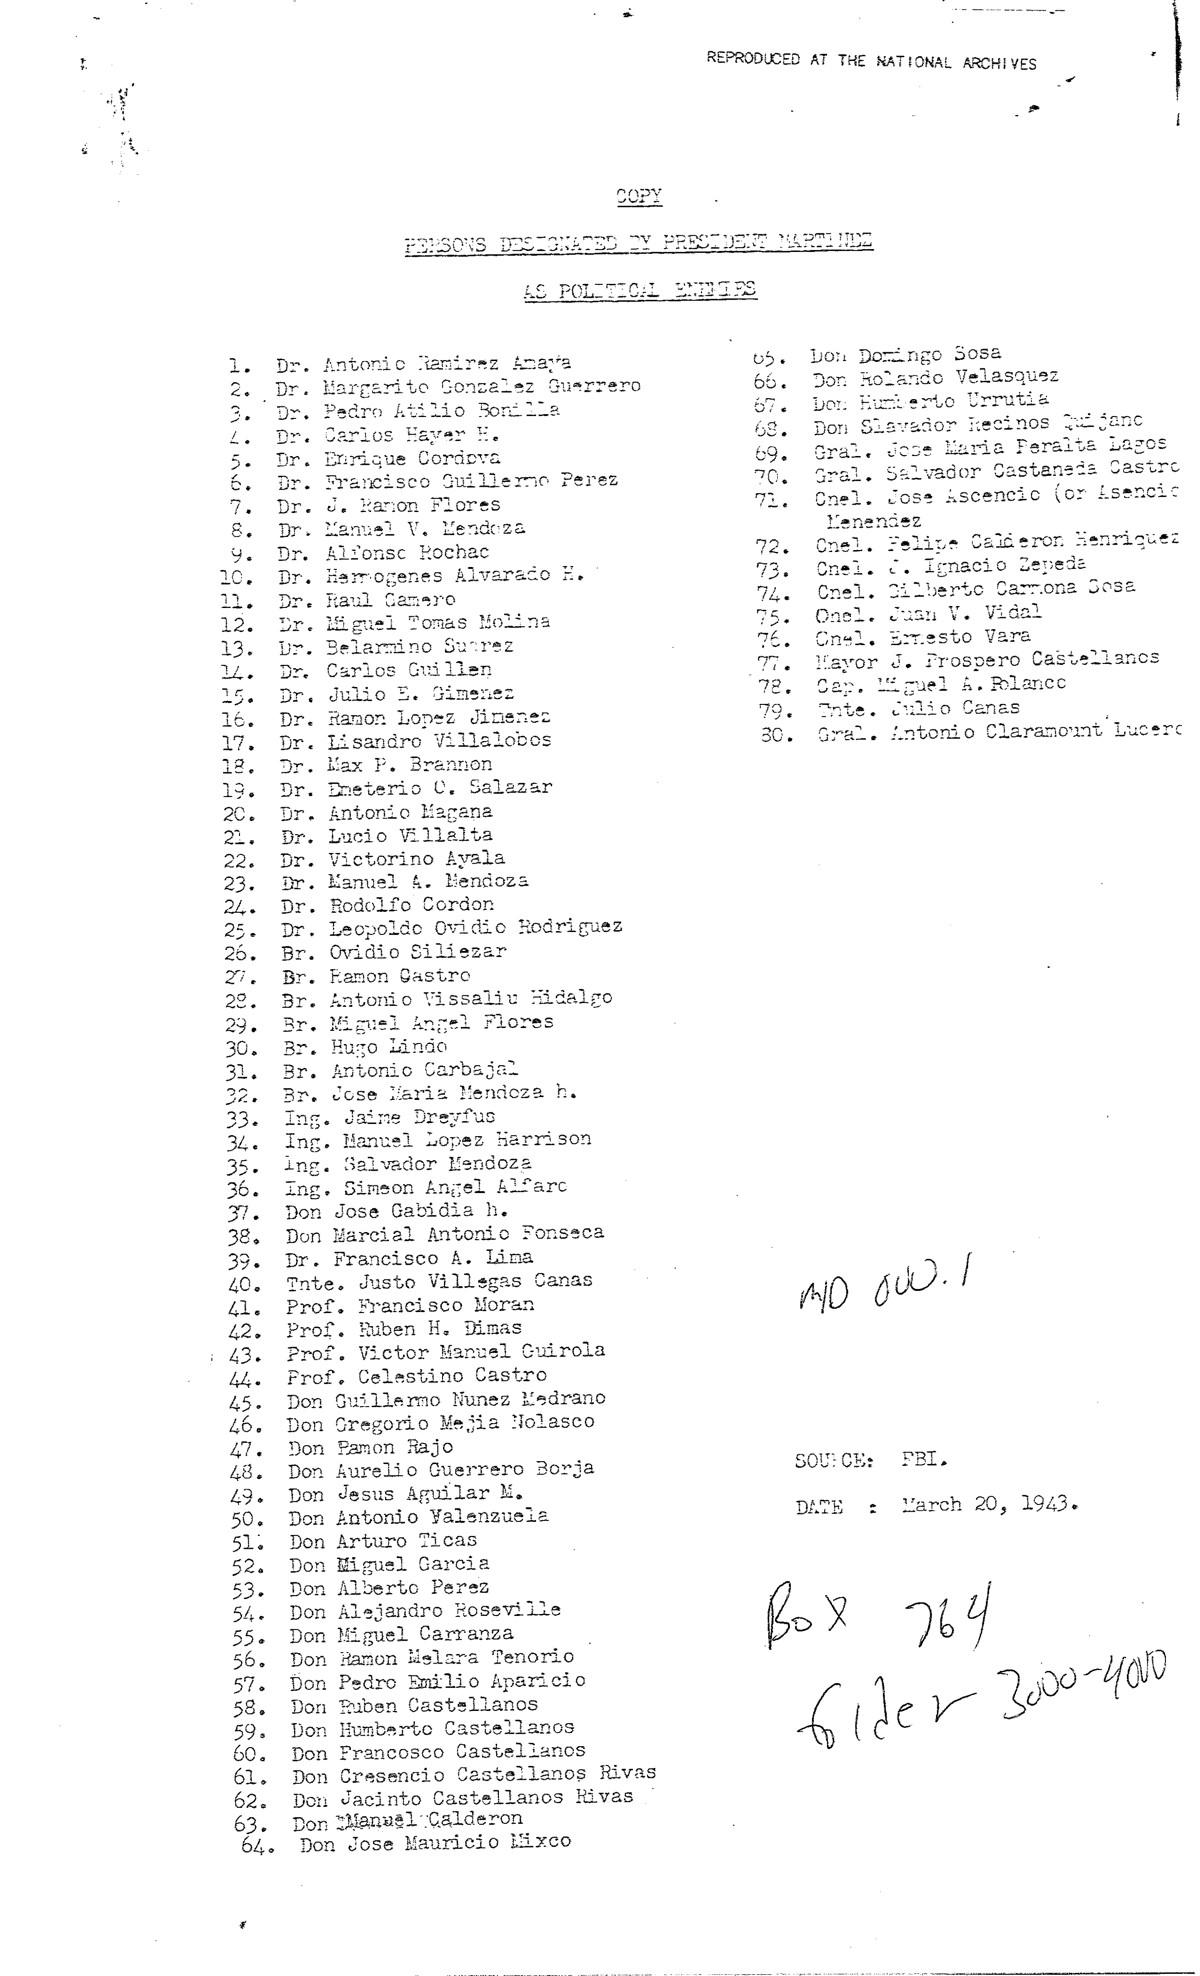 Copy: Persons Designated by President Maximiliano Hernández Martínez as Political Enemies,” March 20, 1943, G-2 Military Reports, Box 764, folder 3000-4000, Washington National Records Center, Suitland, Maryland.